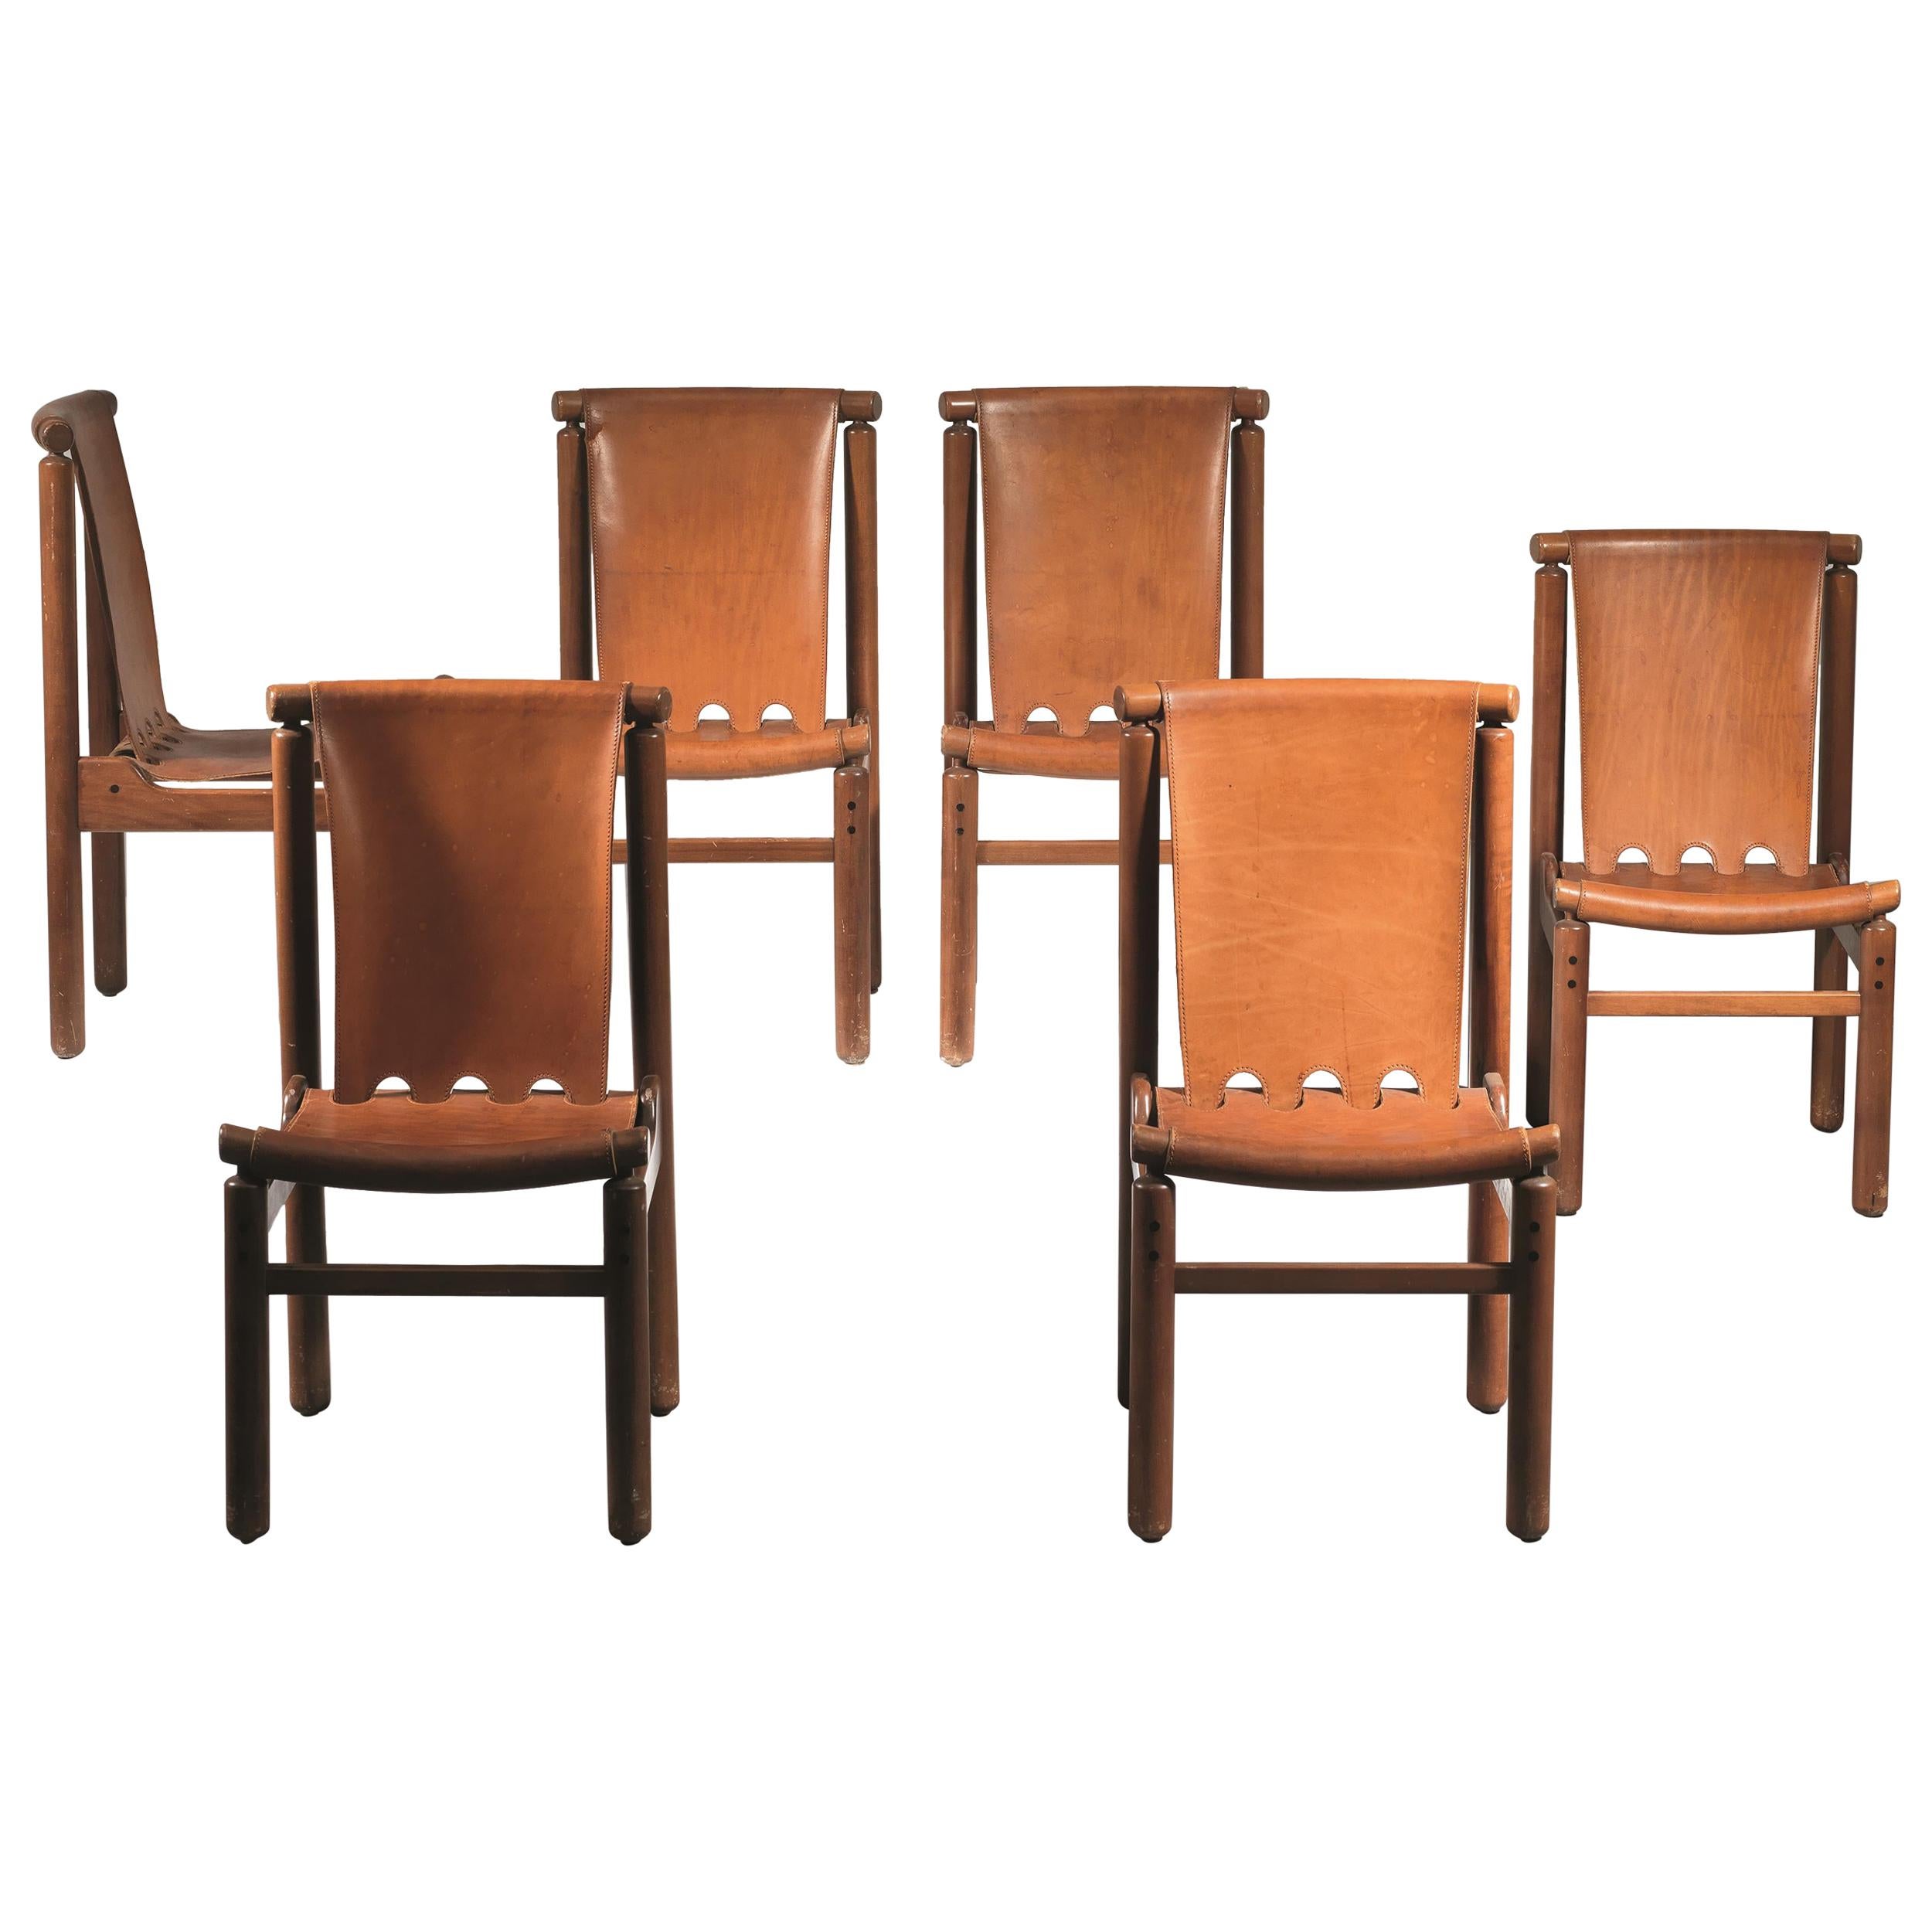 Set of ten dining chairs designed by Ilmari Tapiovaara for La Permanente Cantù, (1950).
Chairs with wooden structure and leather seat and back.
Production La permanente Cantù, circa 1950, Italy.
Size: 48 x 58 x 90 cm (each).
 